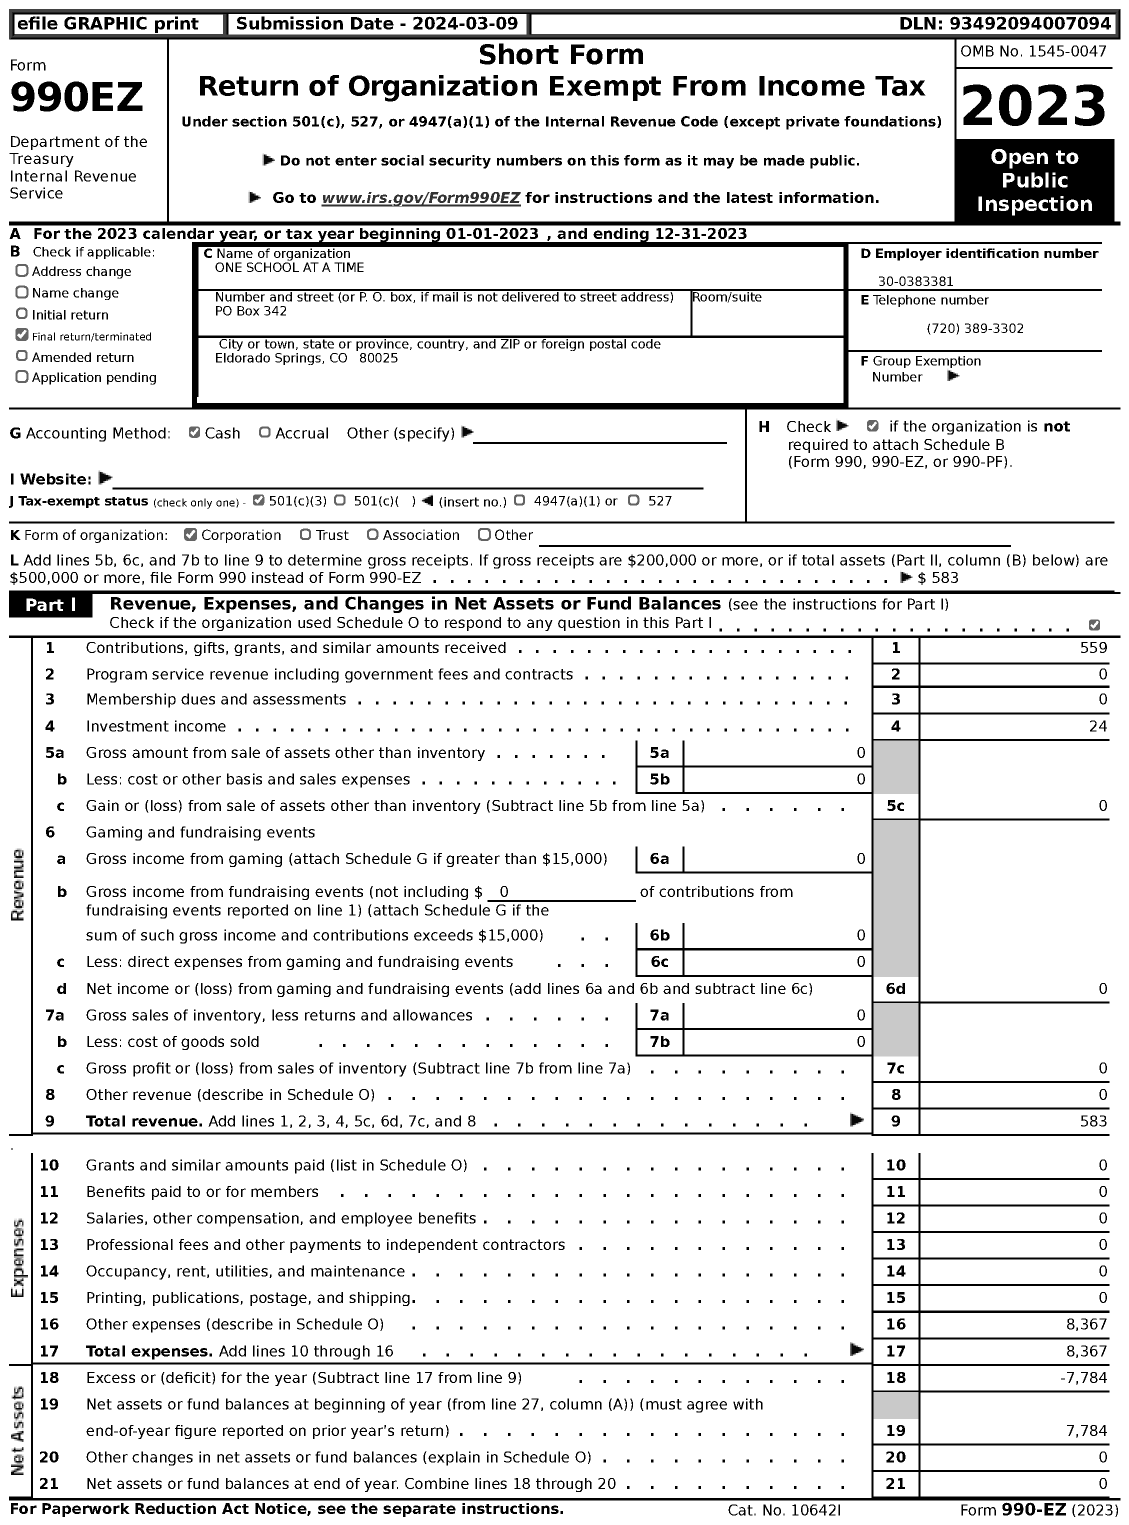 Image of first page of 2023 Form 990EZ for One School at A Time